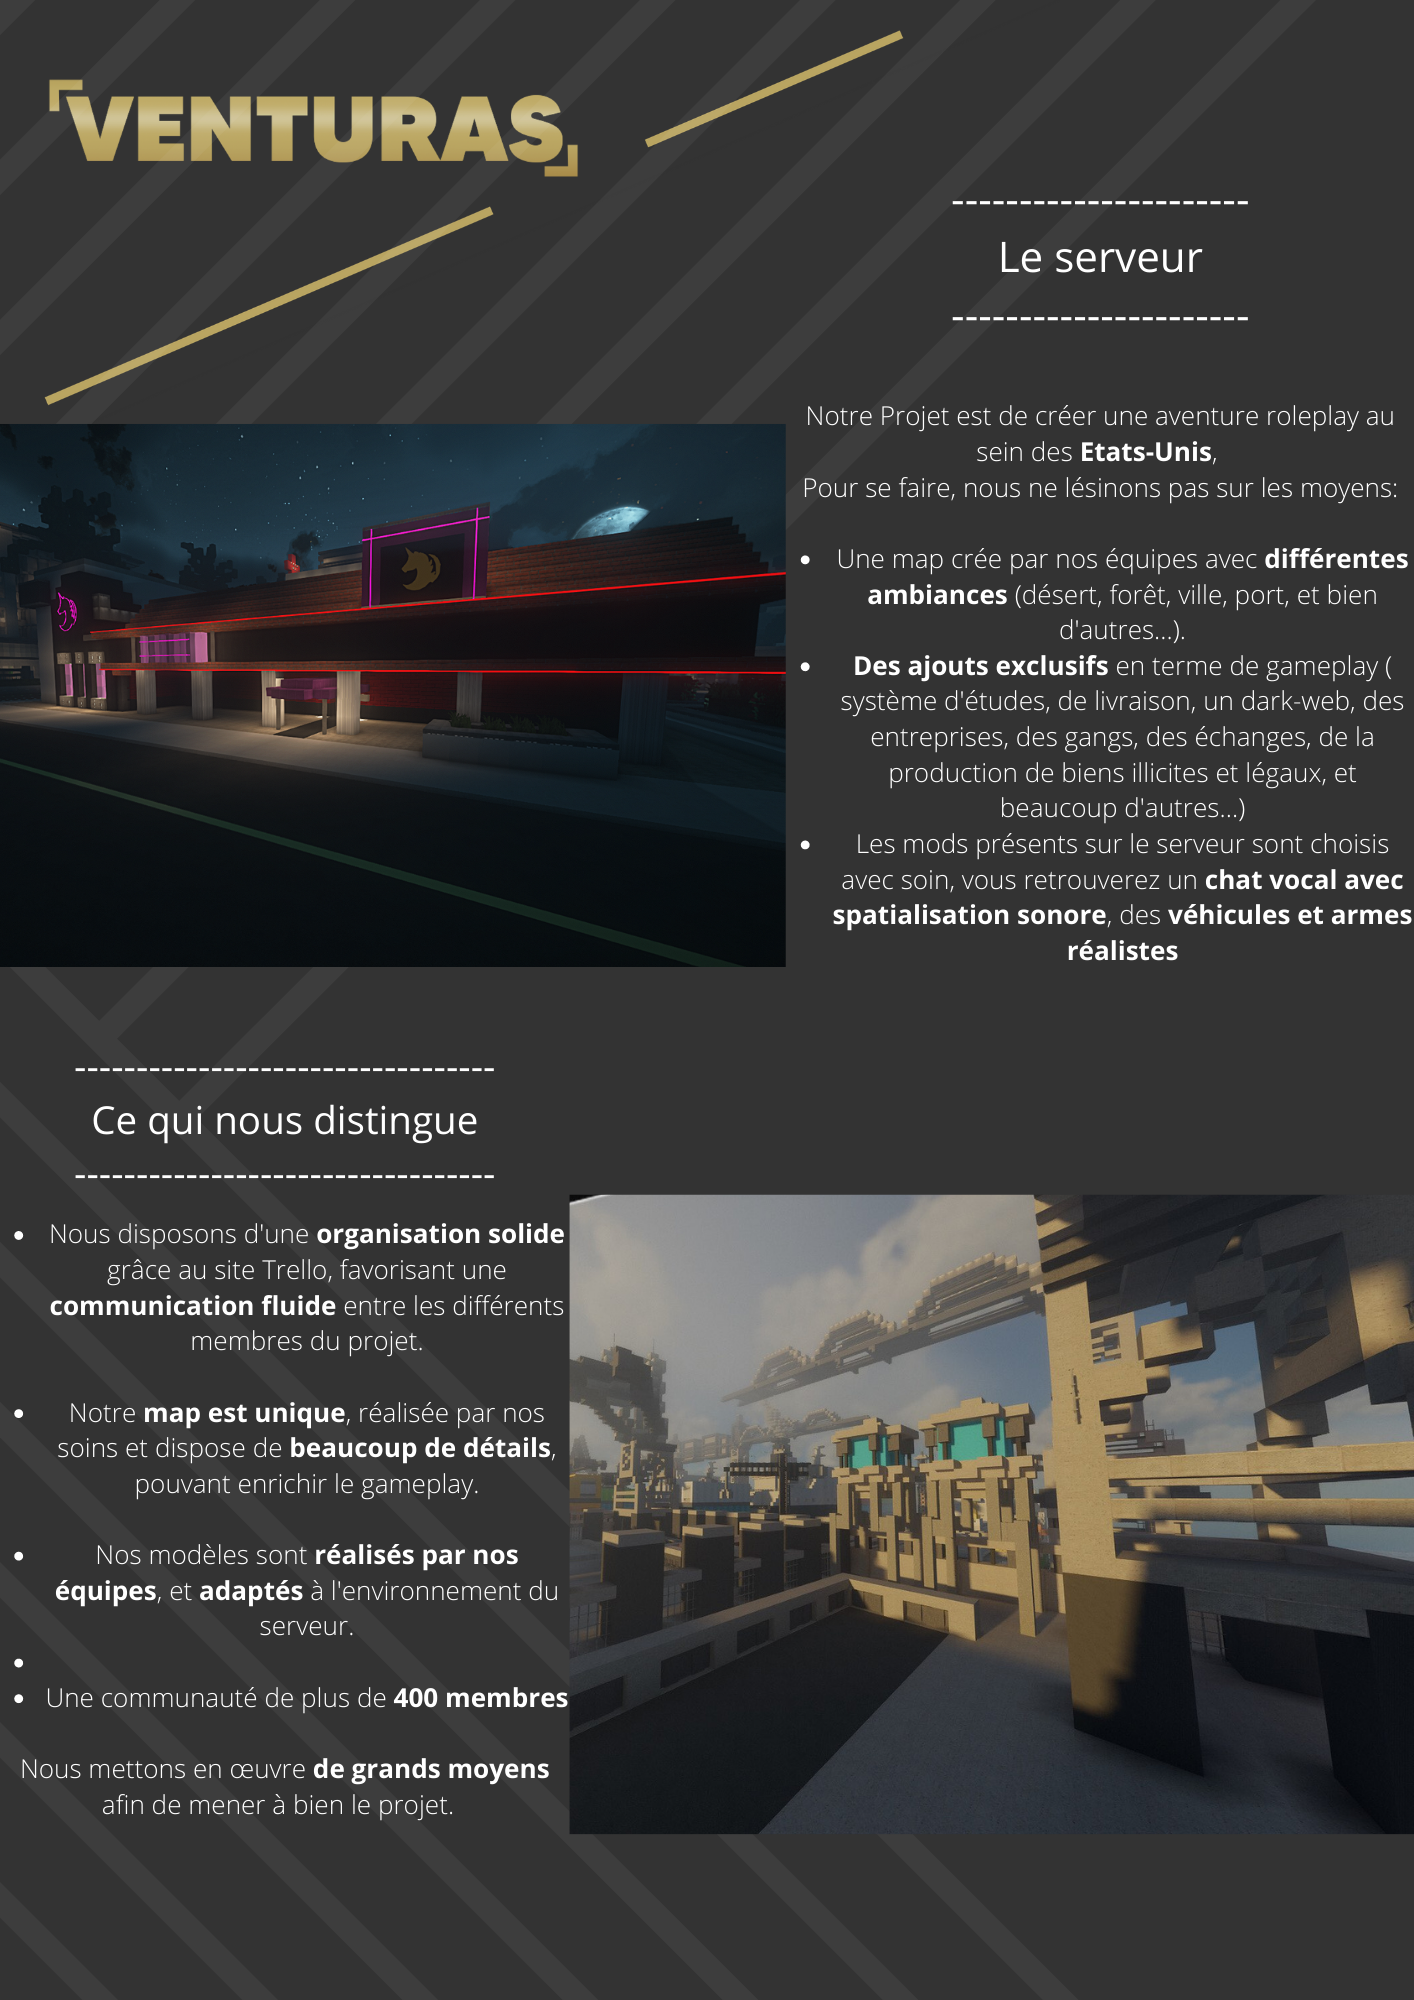 Annonce recrutement Venutras V3-page1.png